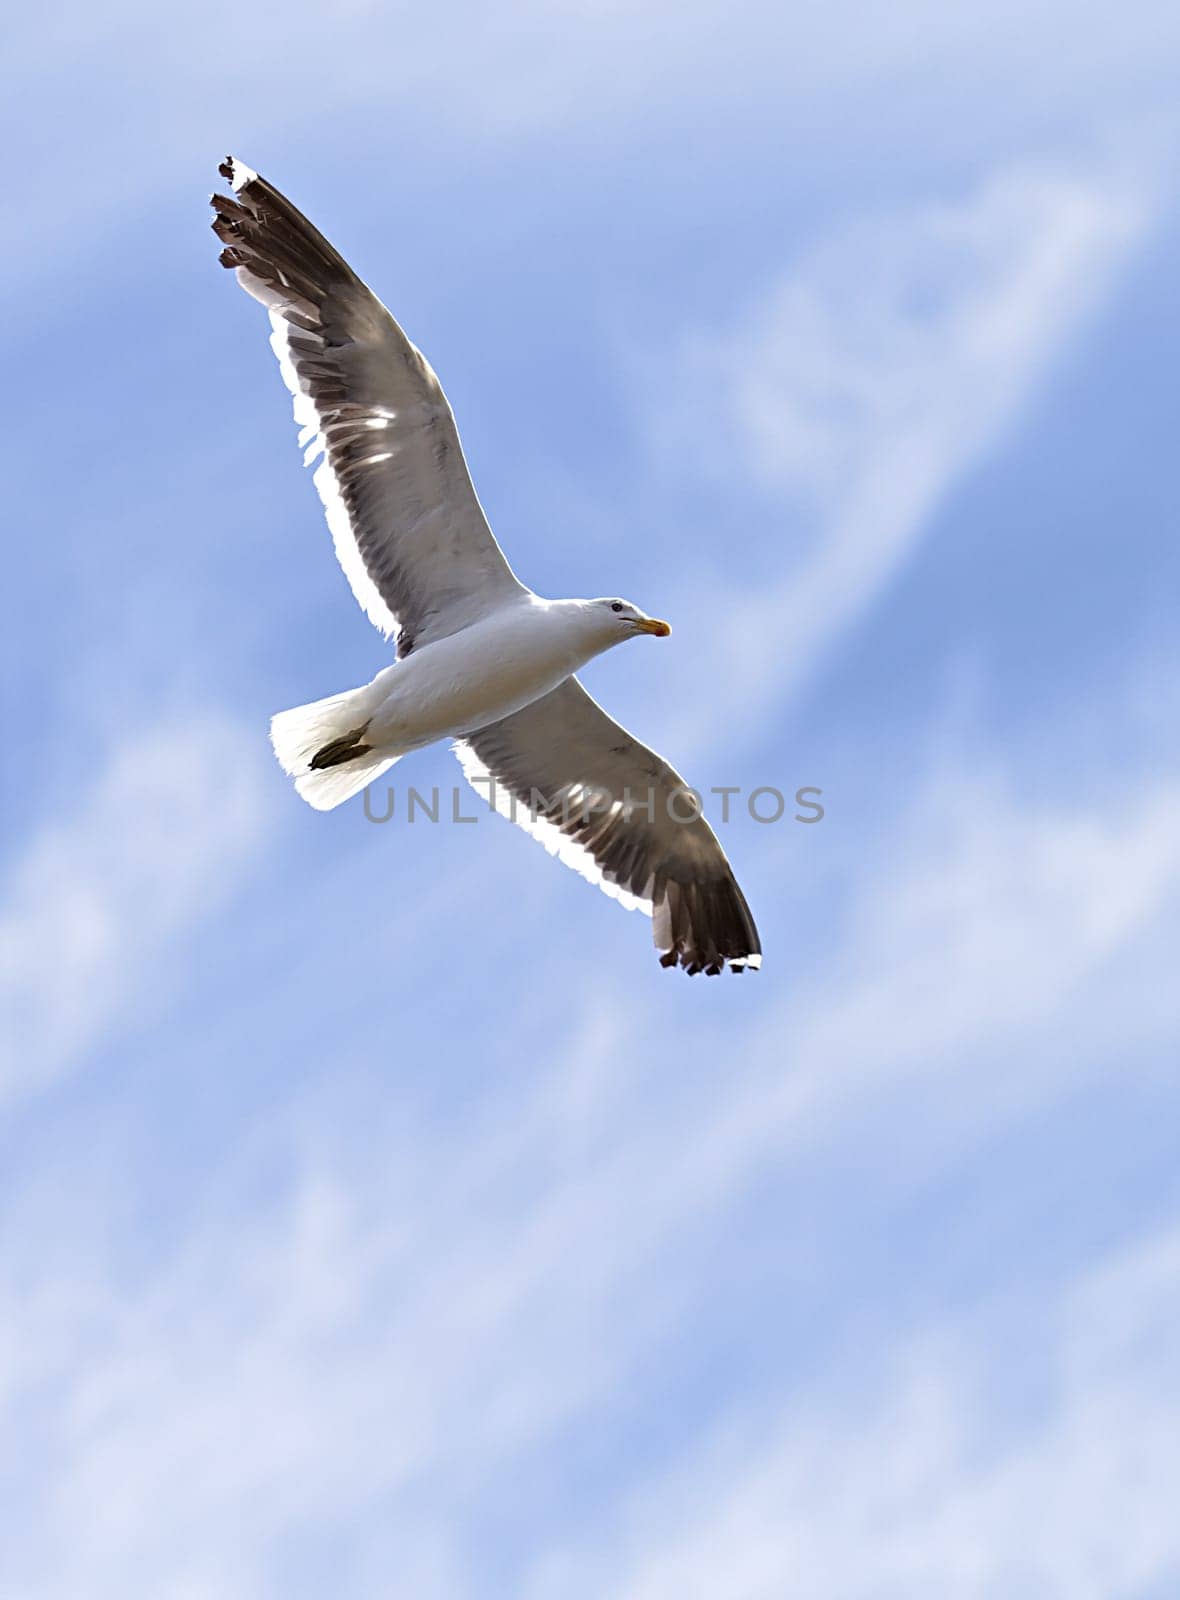 Flight, freedom and bird in sky with clouds, animals in migration and travel in air. Nature, wings and seagull flying with calm, tropical summer and wildlife with feathers, hunting and journey.